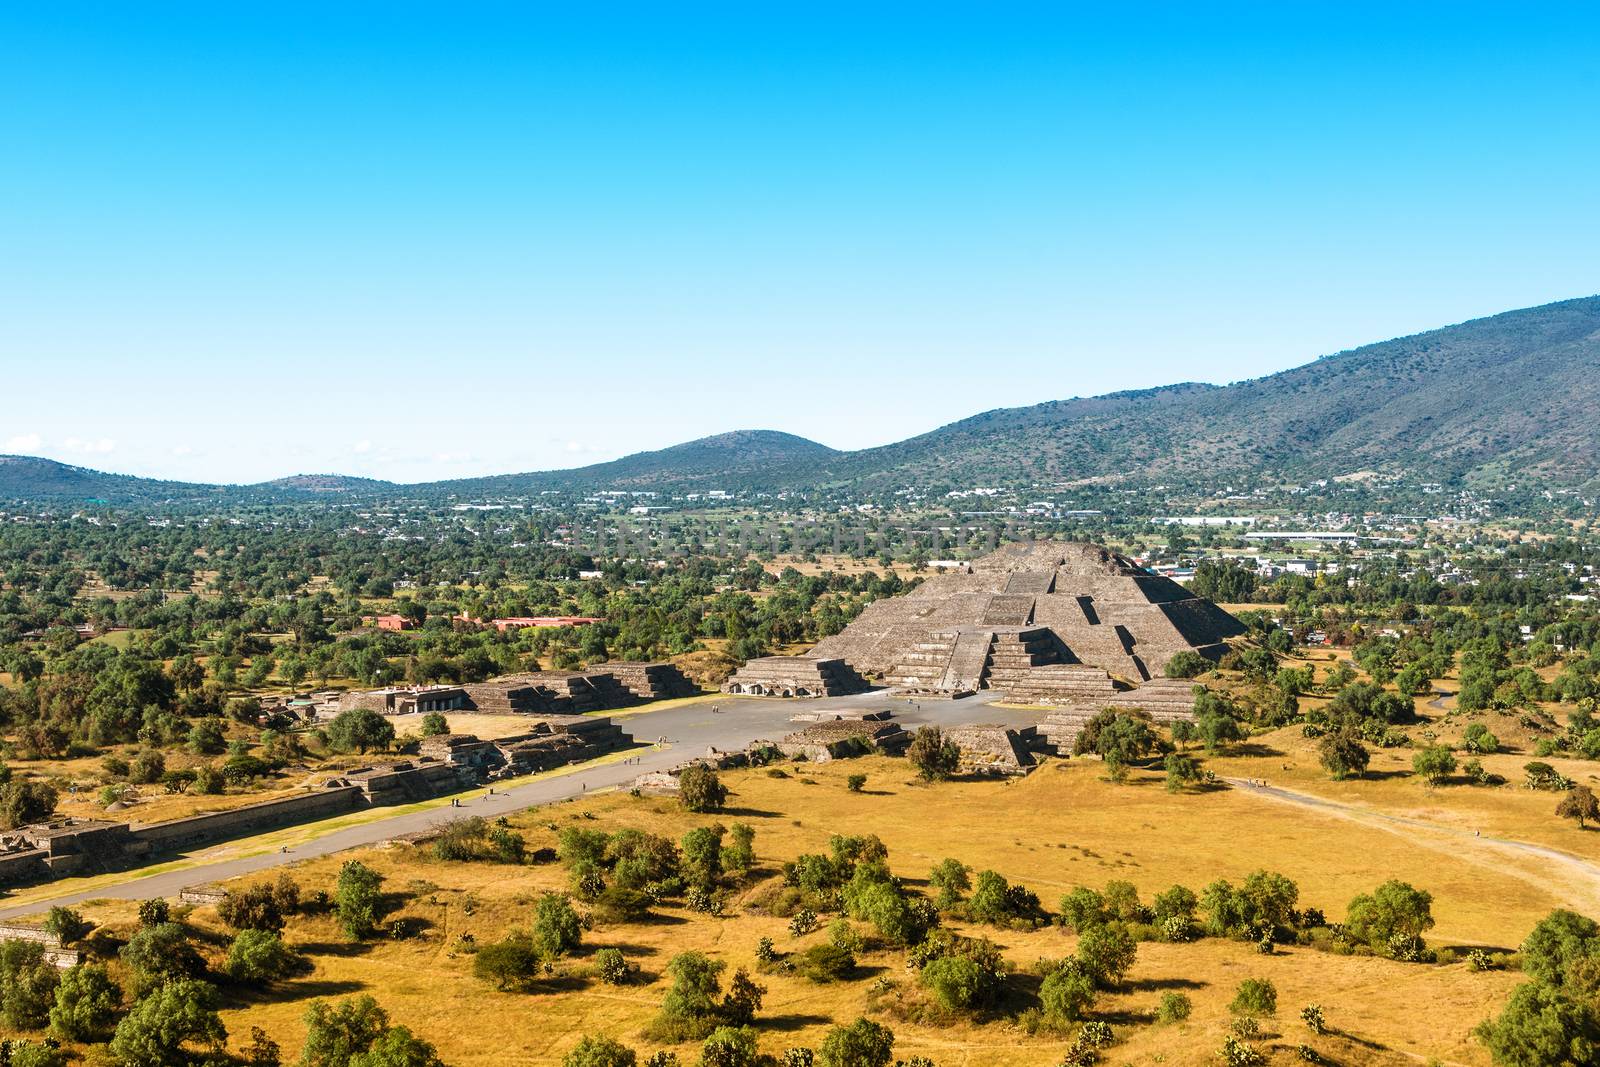 Pyramid of the Moon with Plaza of the Moon and a part of the Avenue of the Dead seen from the Pyramid of the Sun in San Joan Teotihuacan, near Mexico City, Mexico, on a sunny afternood.